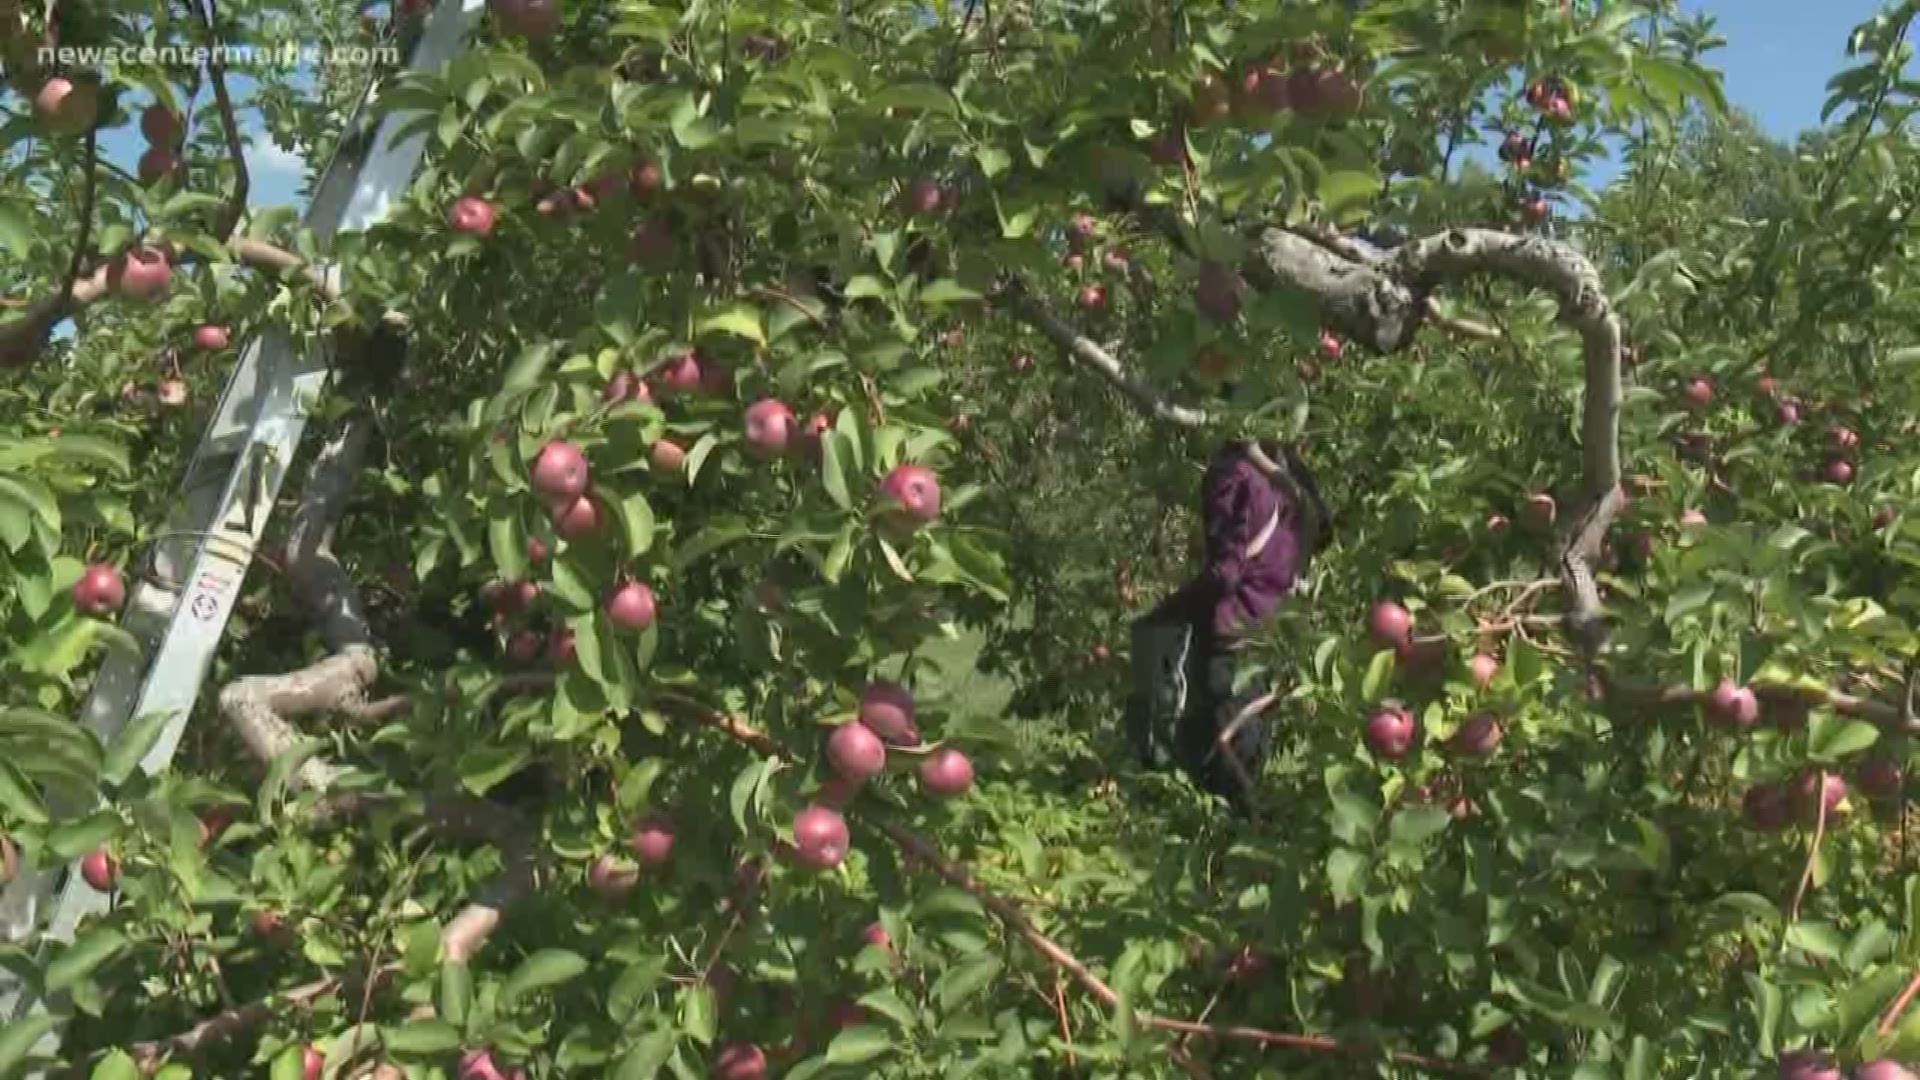 The trade war with China is having ill effects on the Maine apple business